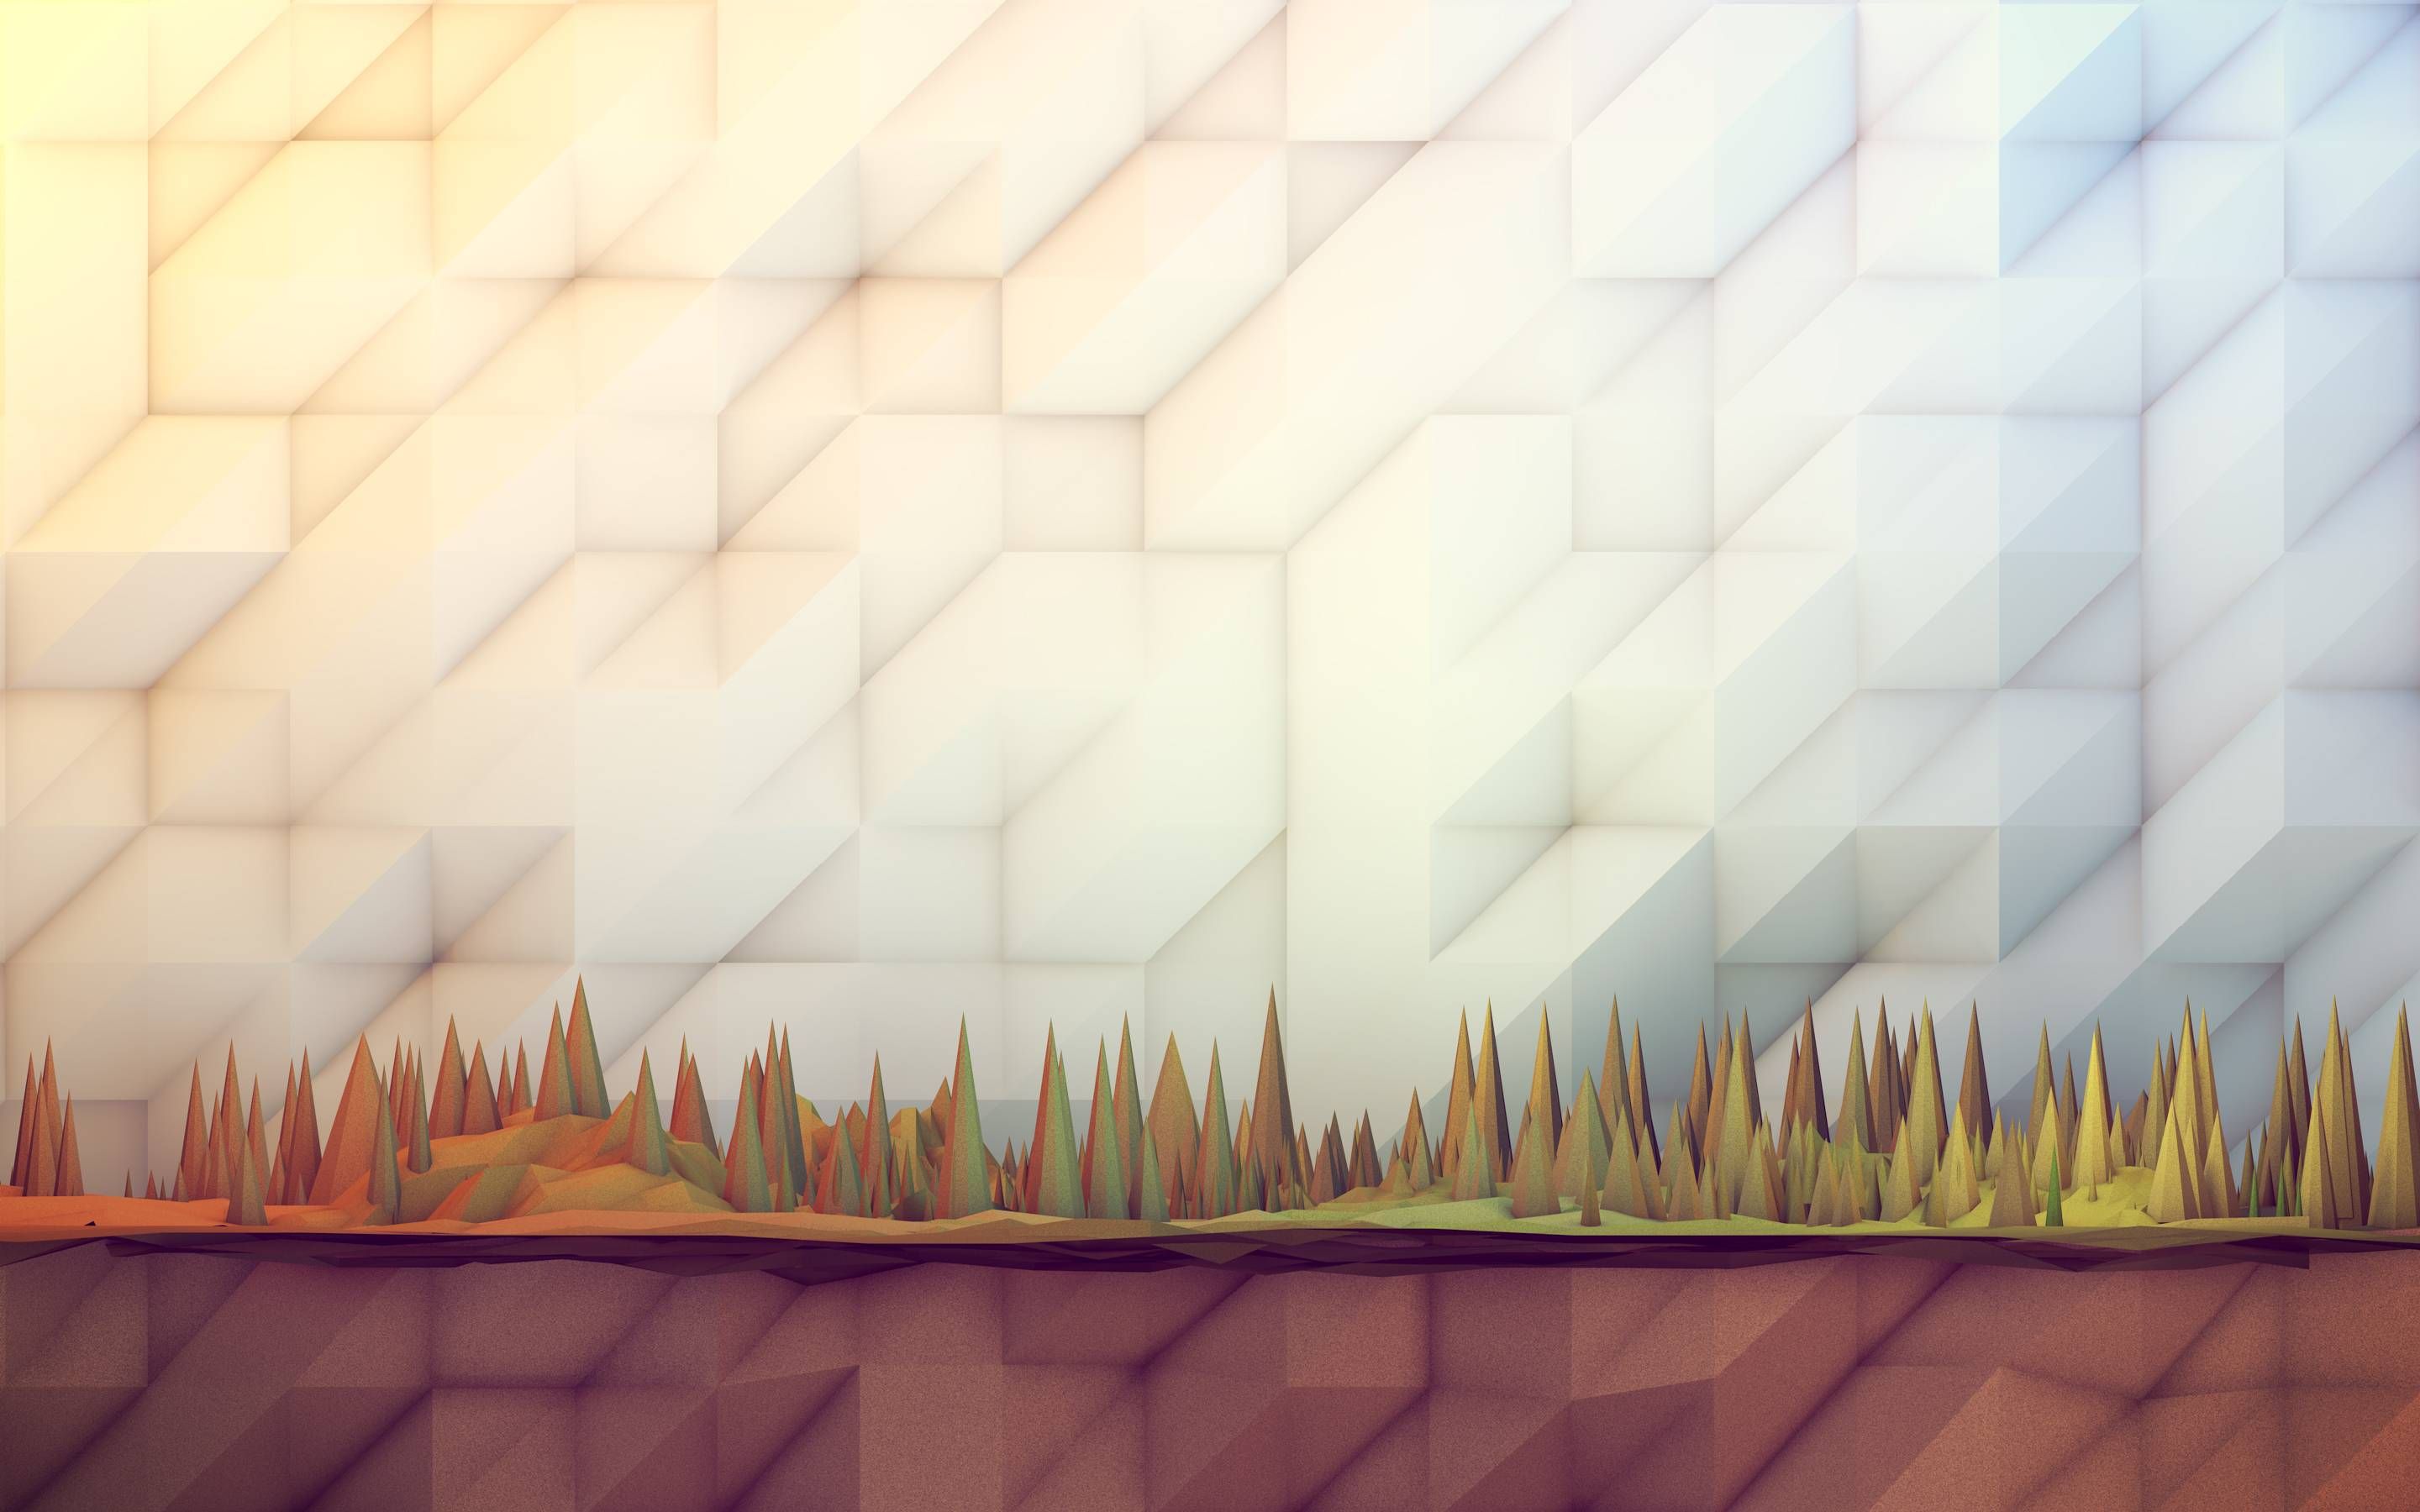 Low Poly Art Wallpapers